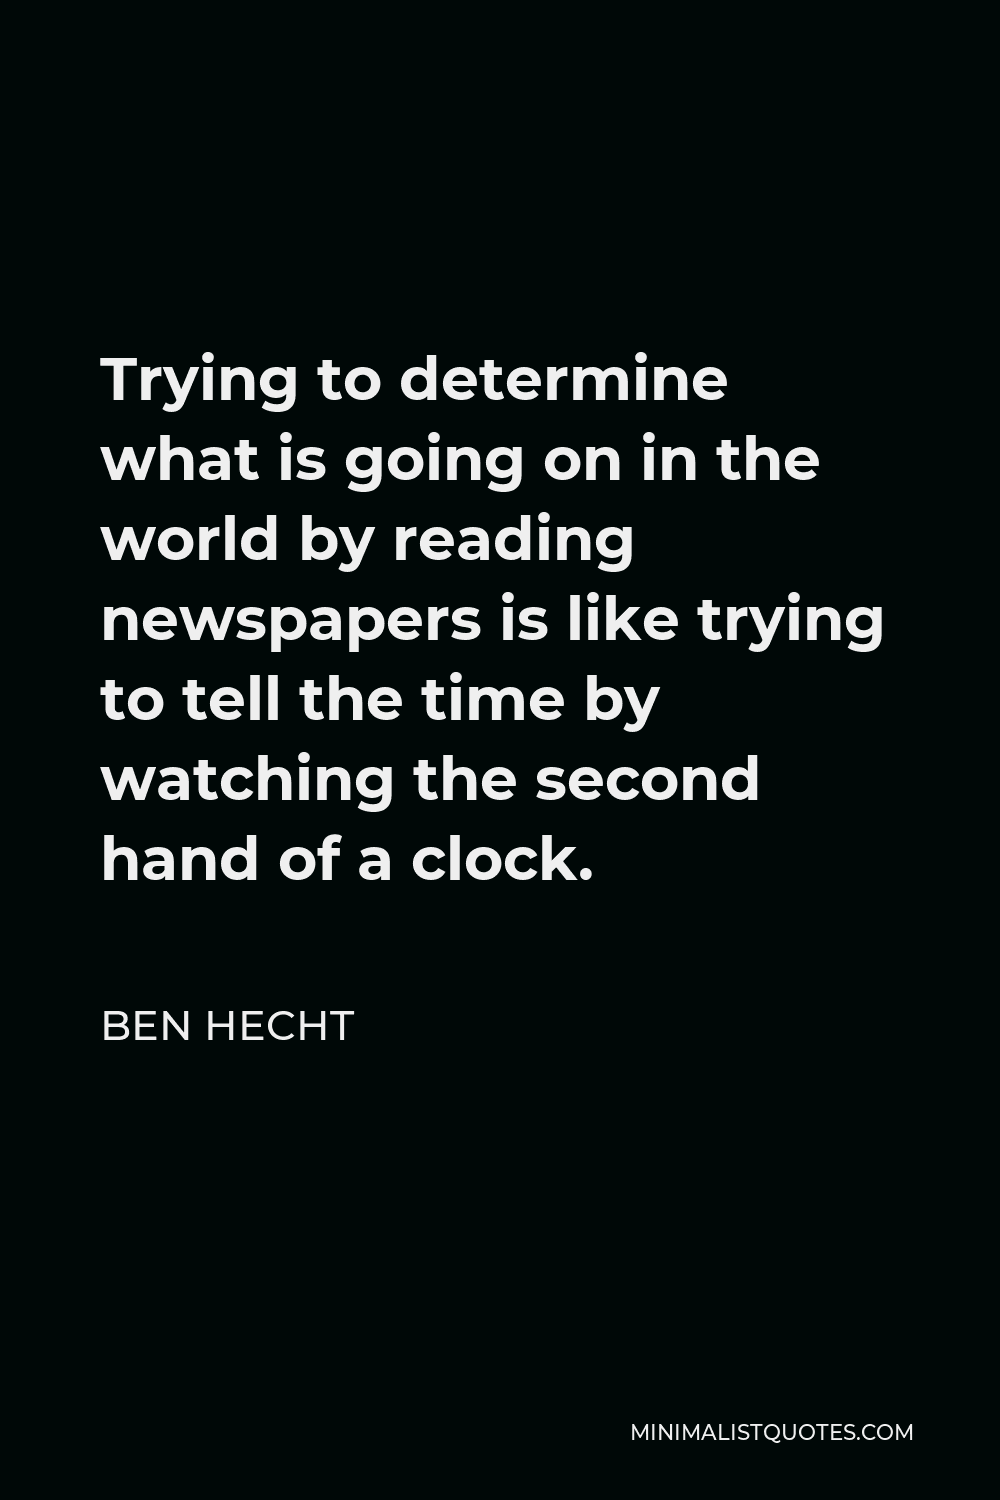 Ben Hecht Quote - Trying to determine what is going on in the world by reading newspapers is like trying to tell the time by watching the second hand of a clock.